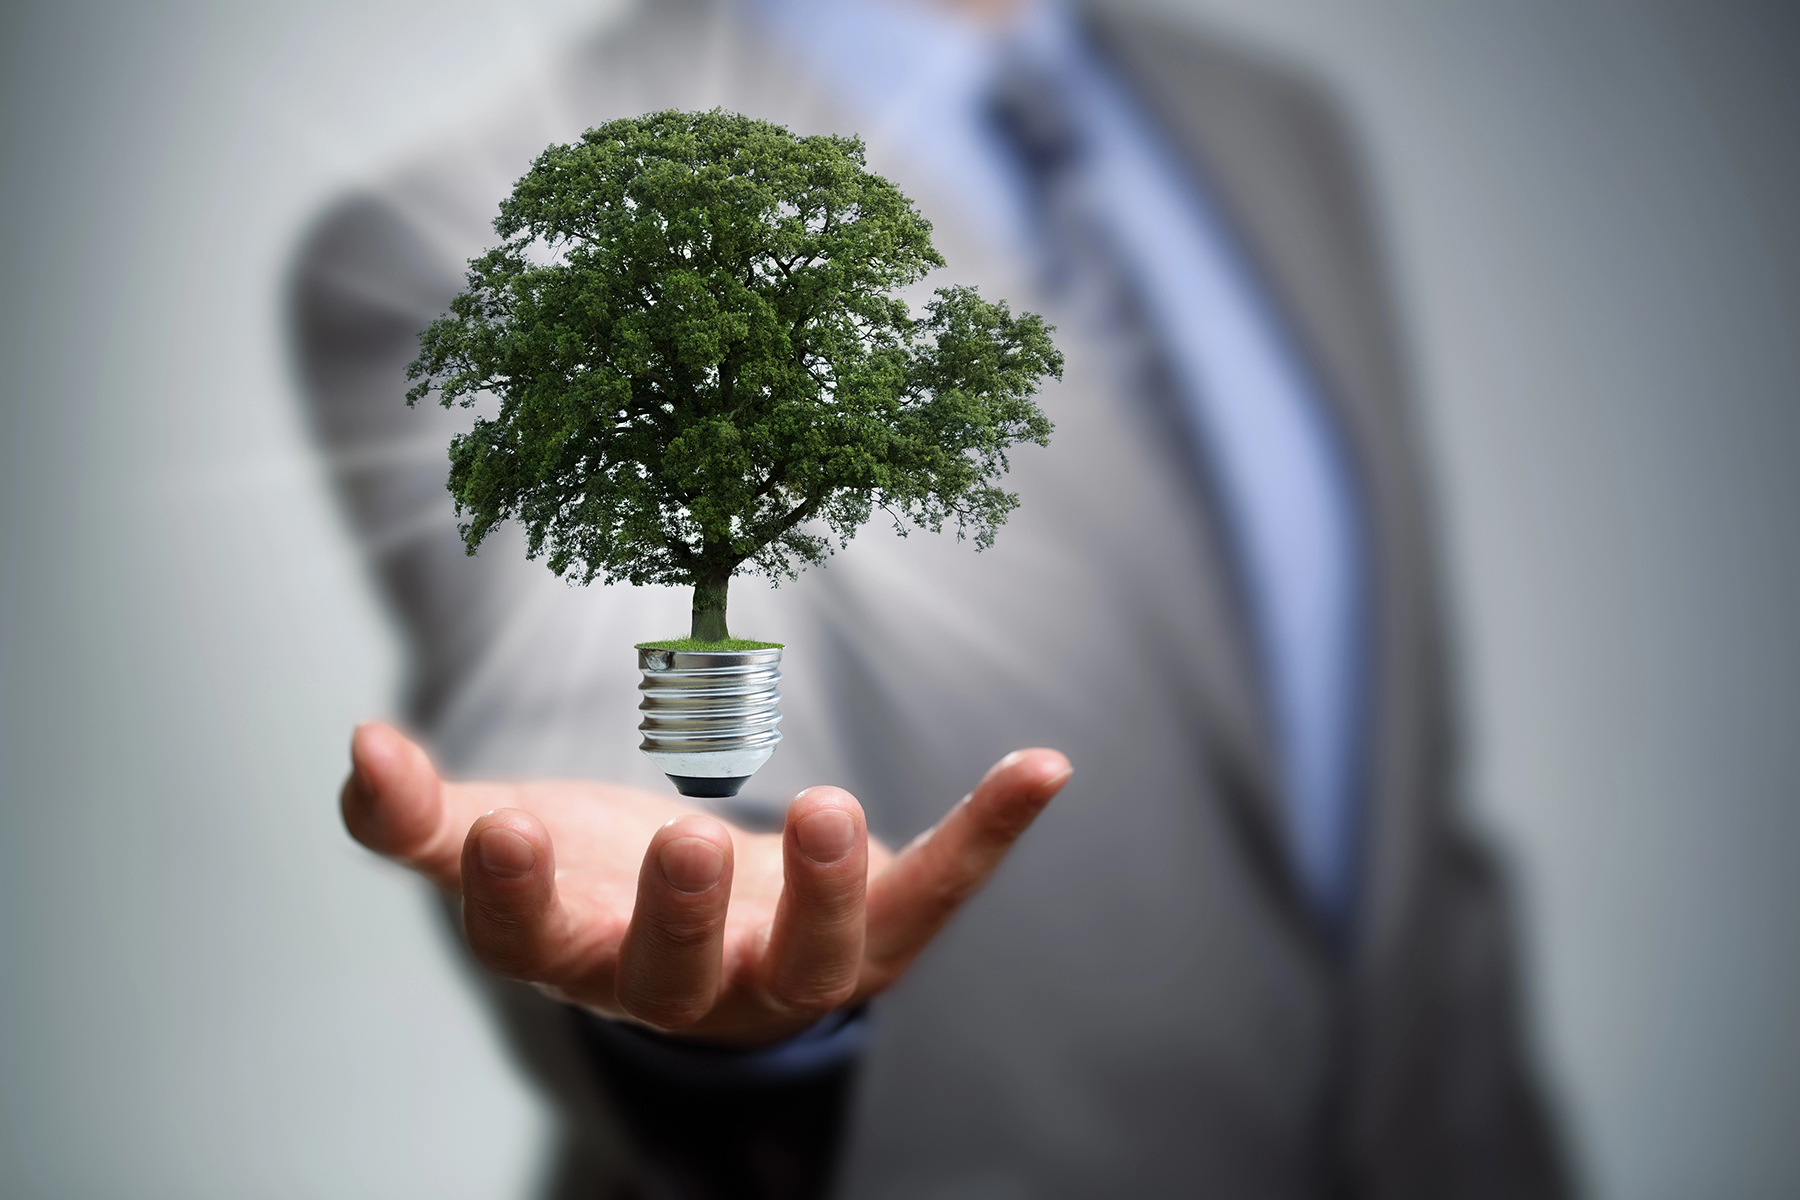 A man holding his hand out with a lightbulb in his palm. Instead of the glass globe of the lightbulb, a glowing tree is there. The image is meant to convey the concept of clean energy.